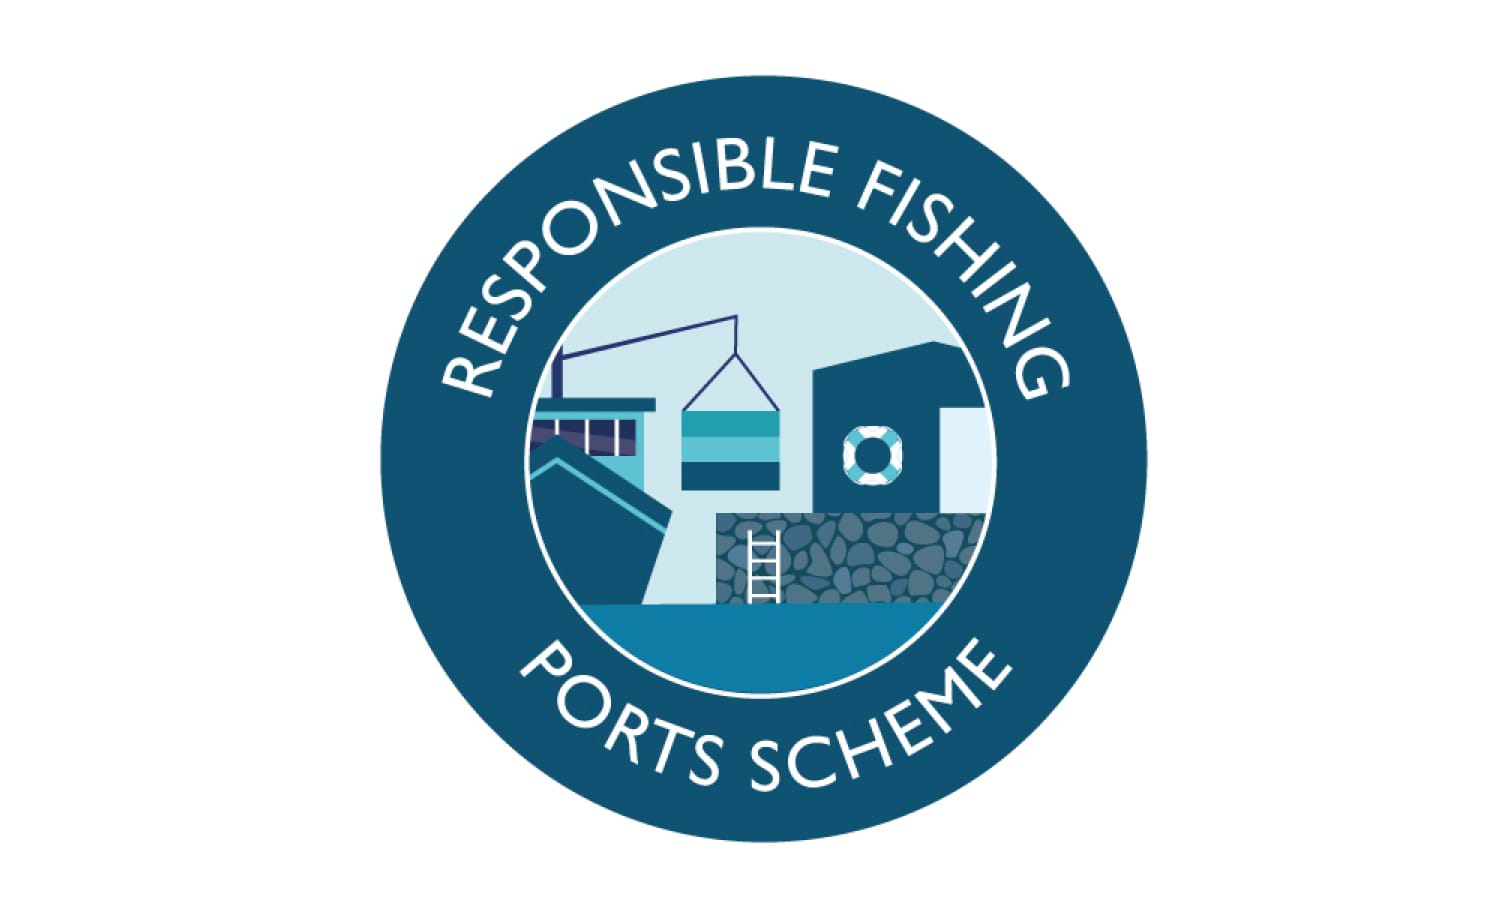 Responsible Fishing Ports Scheme logo - text wraps outside circluar illustration of boxes being lifted between boat and pier